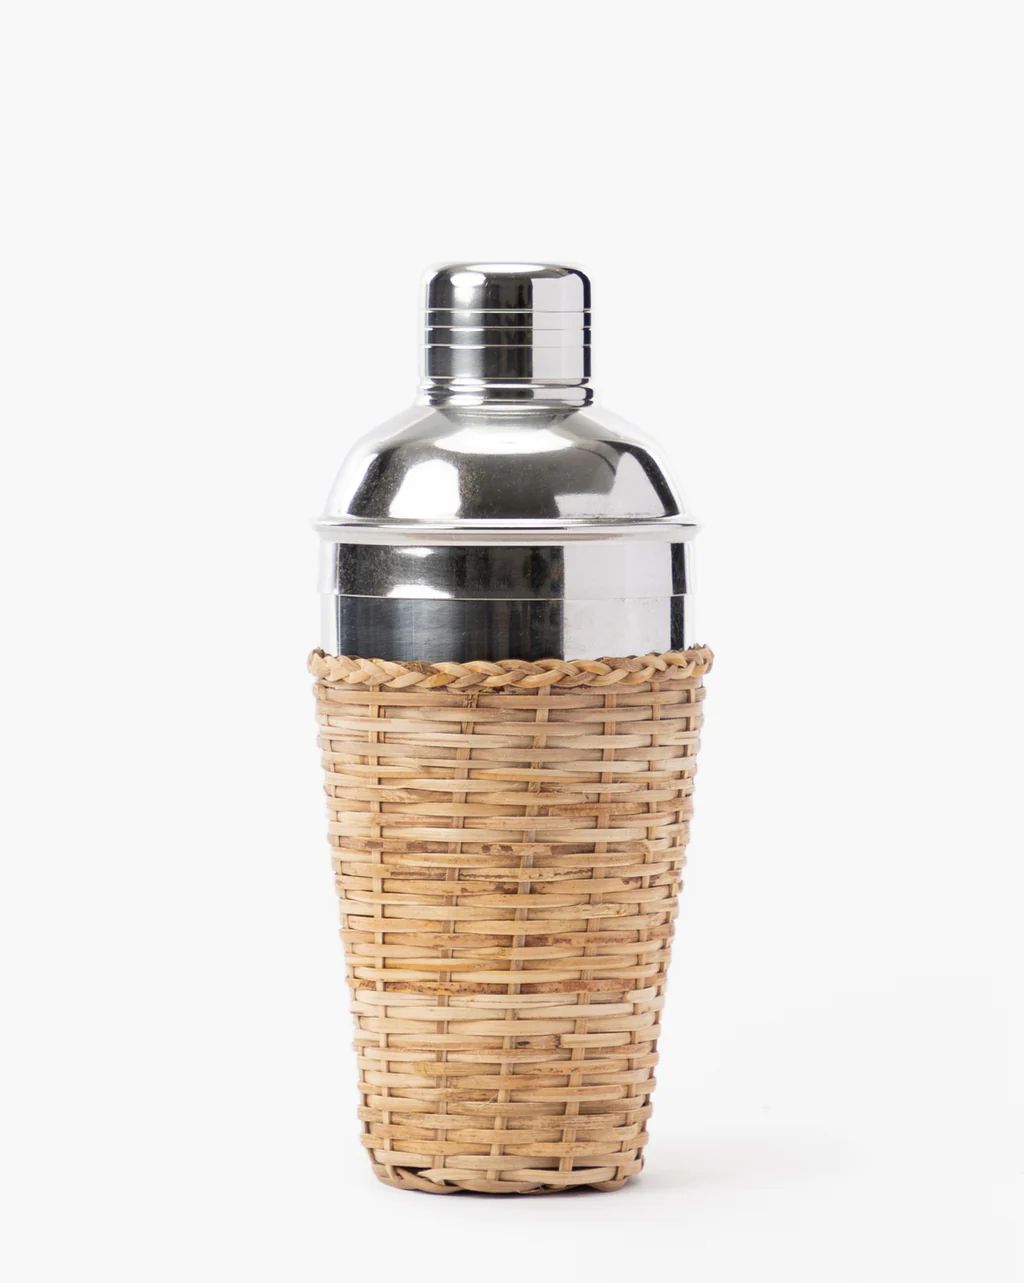 Woven Rattan Cocktail Shaker | McGee & Co.